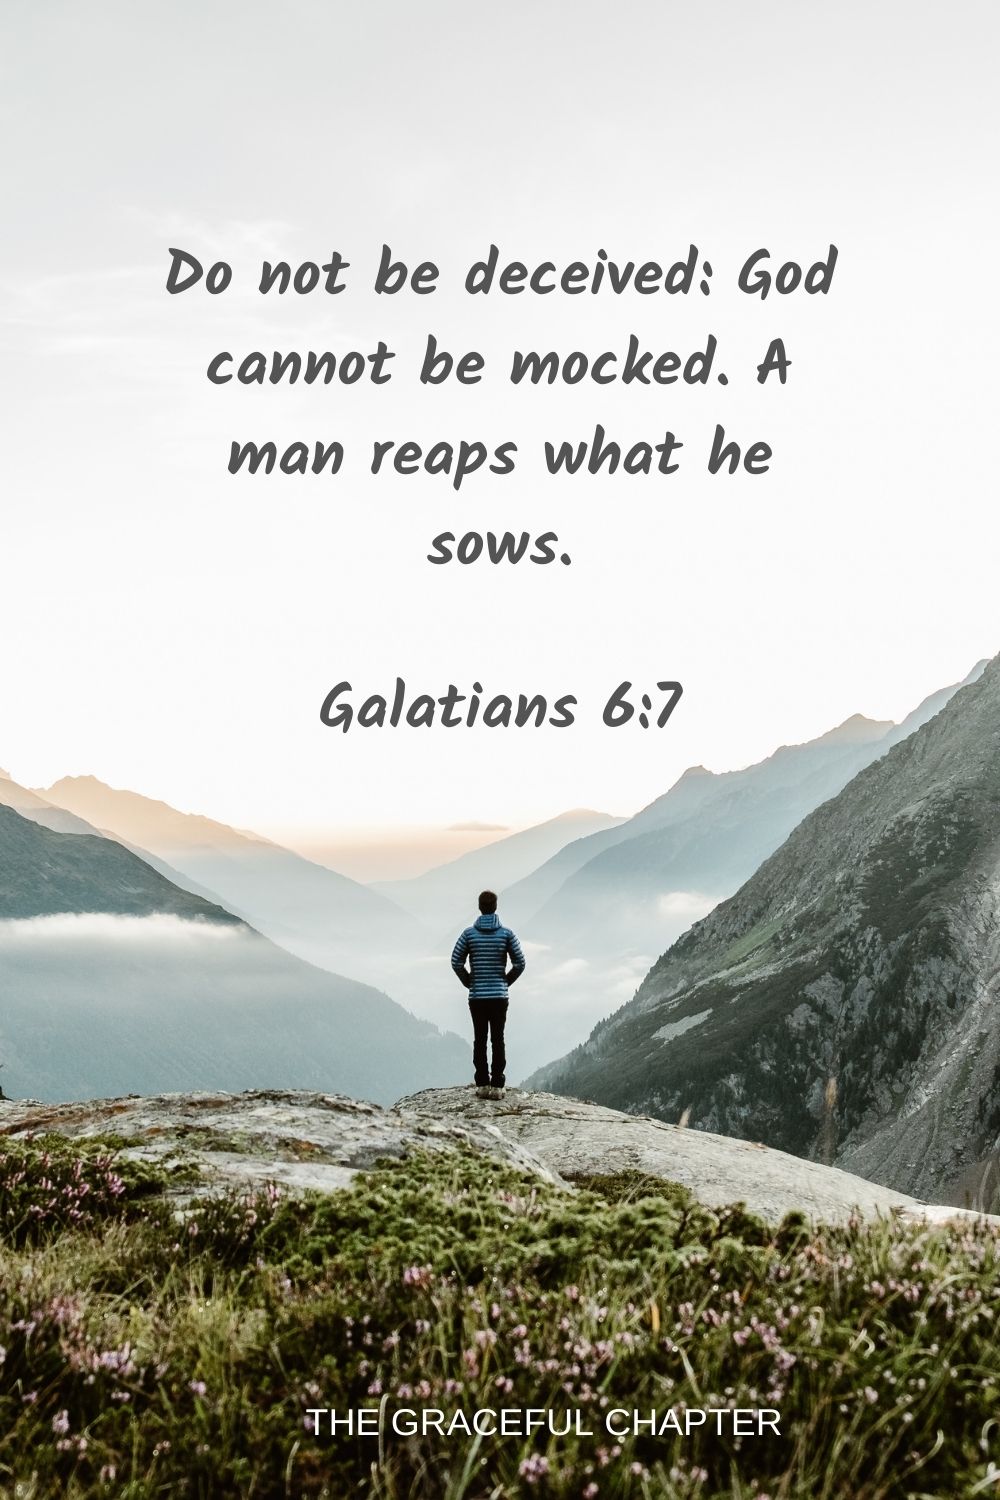 Do not be deceived: God cannot be mocked. A man reaps what he sows. Galatians 6:7